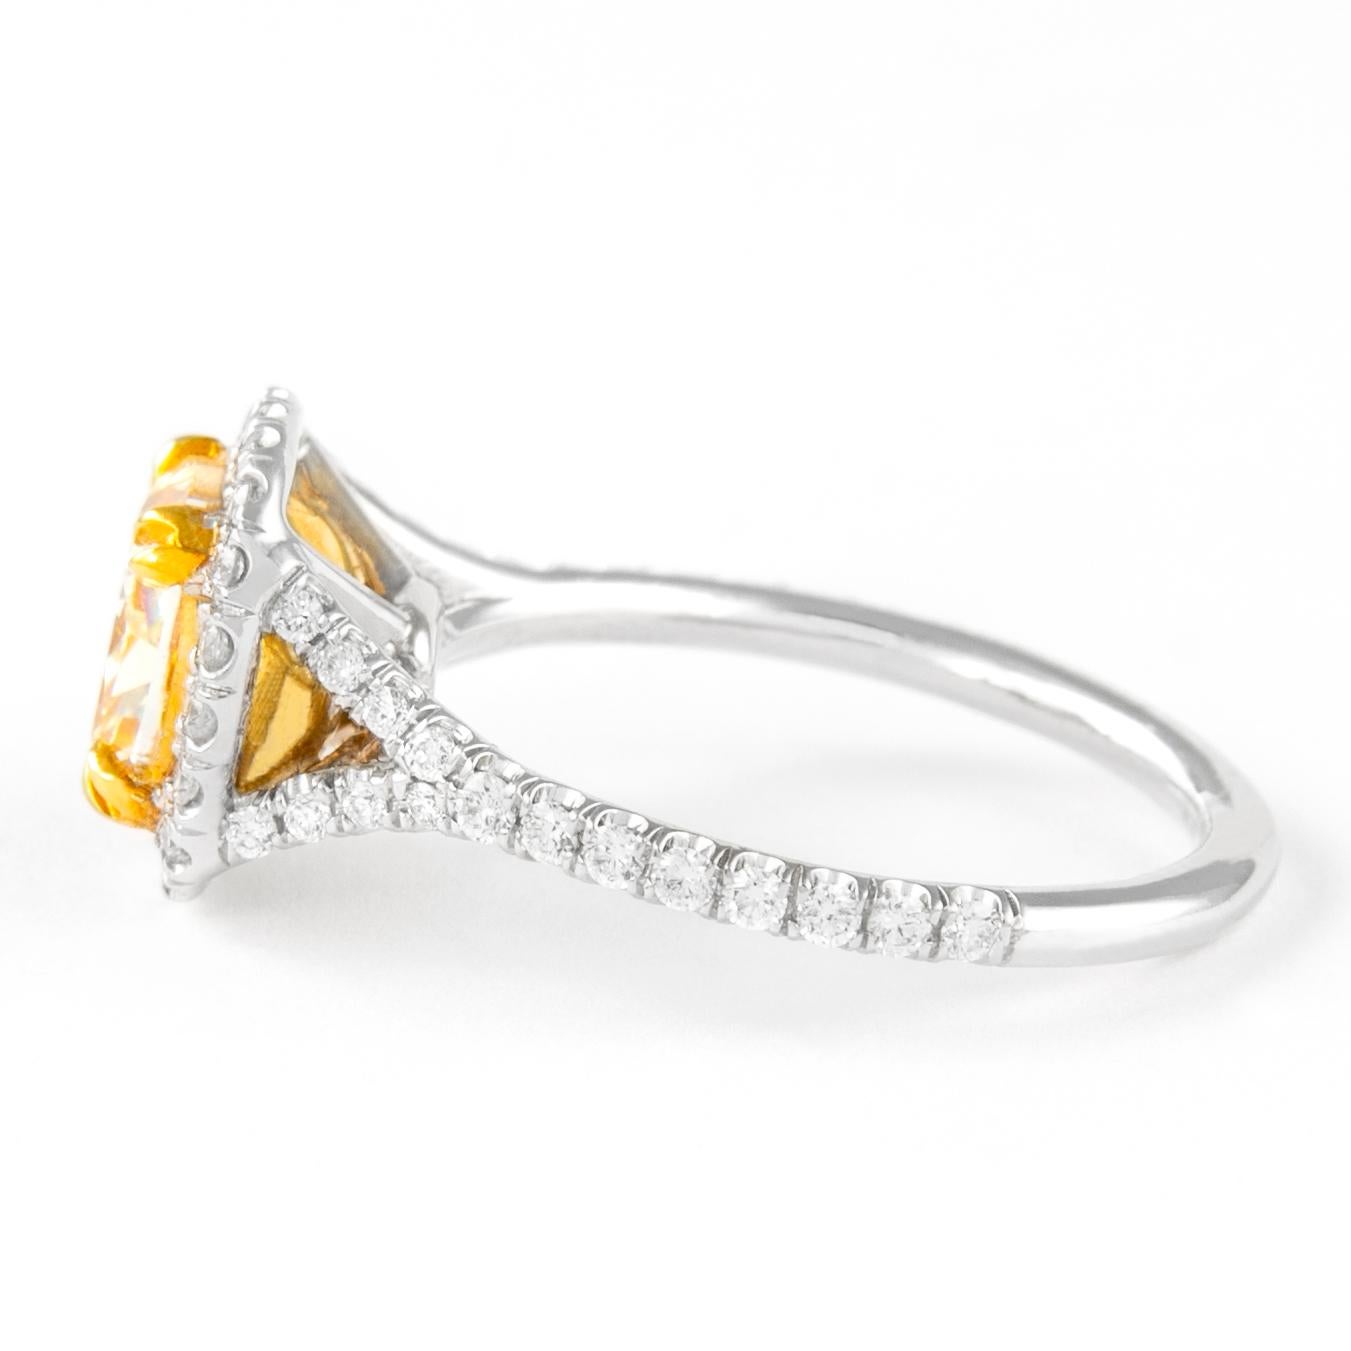 Cushion Cut Alexander 2.07ct Fancy Intense Yellow VS1 Cushion Diamond with Halo Ring 18k For Sale